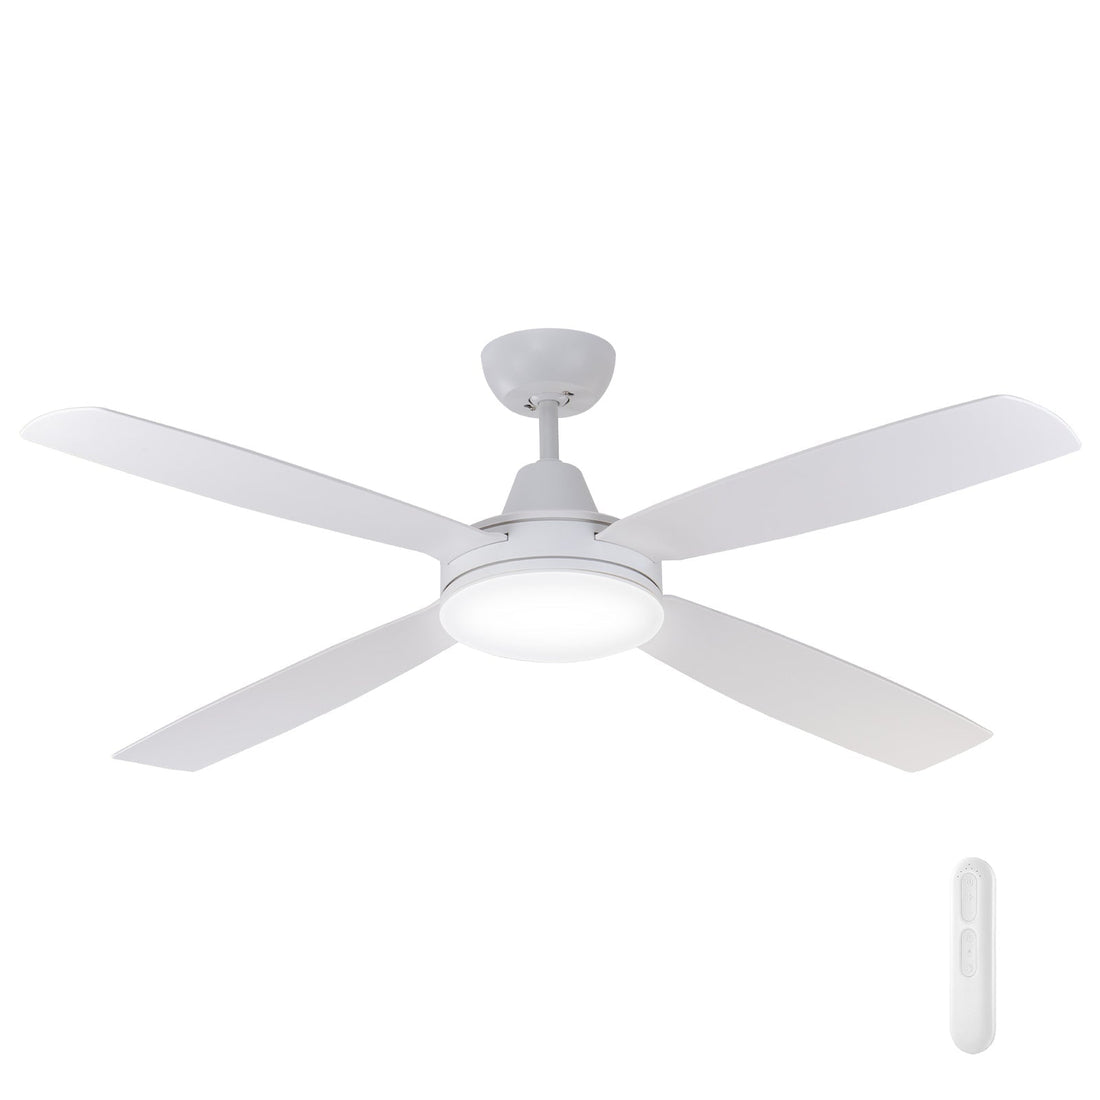 Nemoi DC Ceiling Fan with LED Light and Remote Mercator